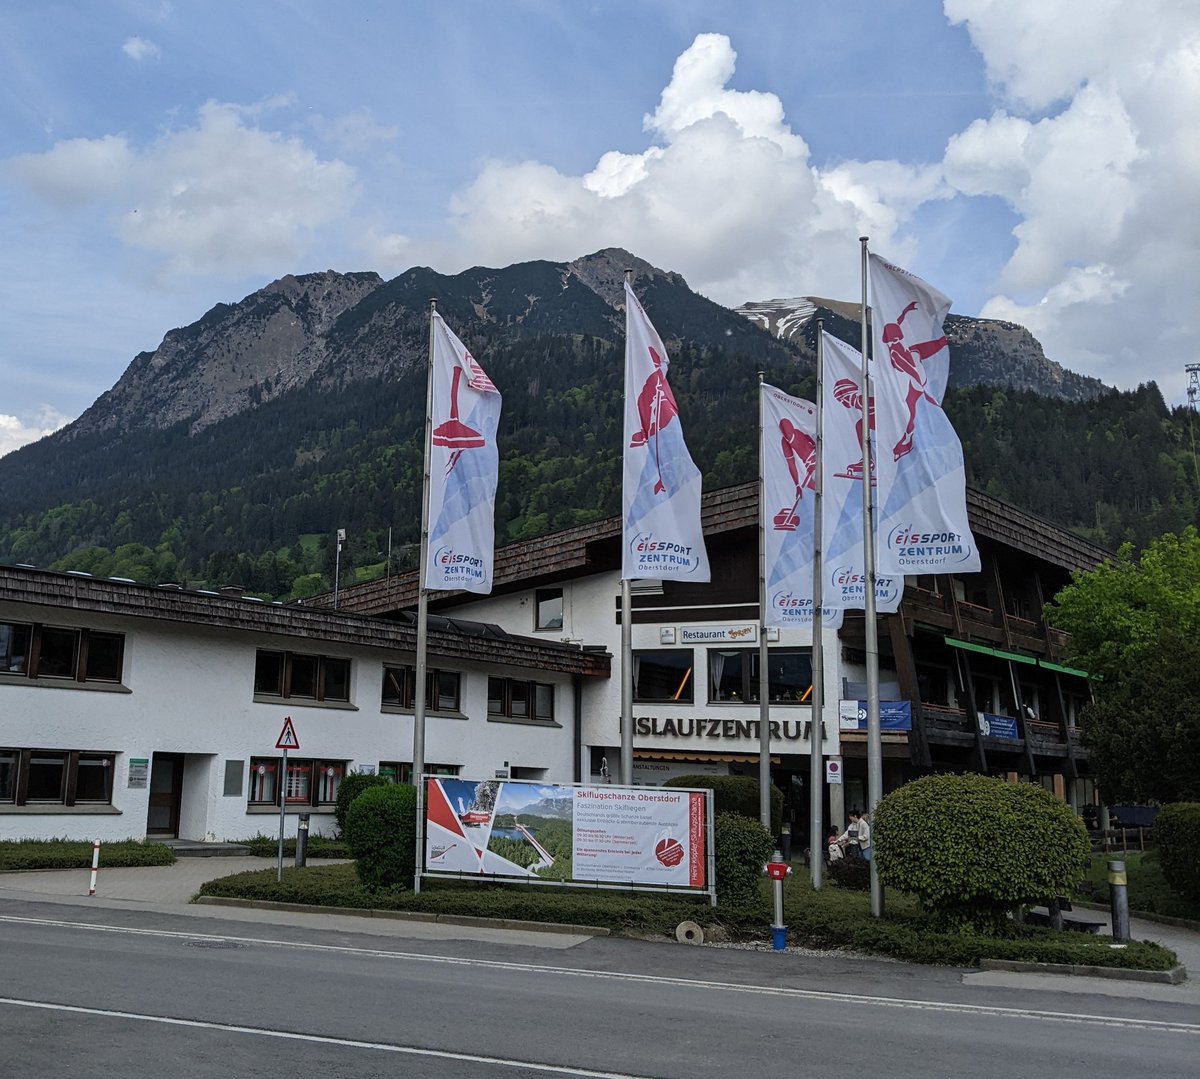 Hello once again Oberstdorf, old friend...